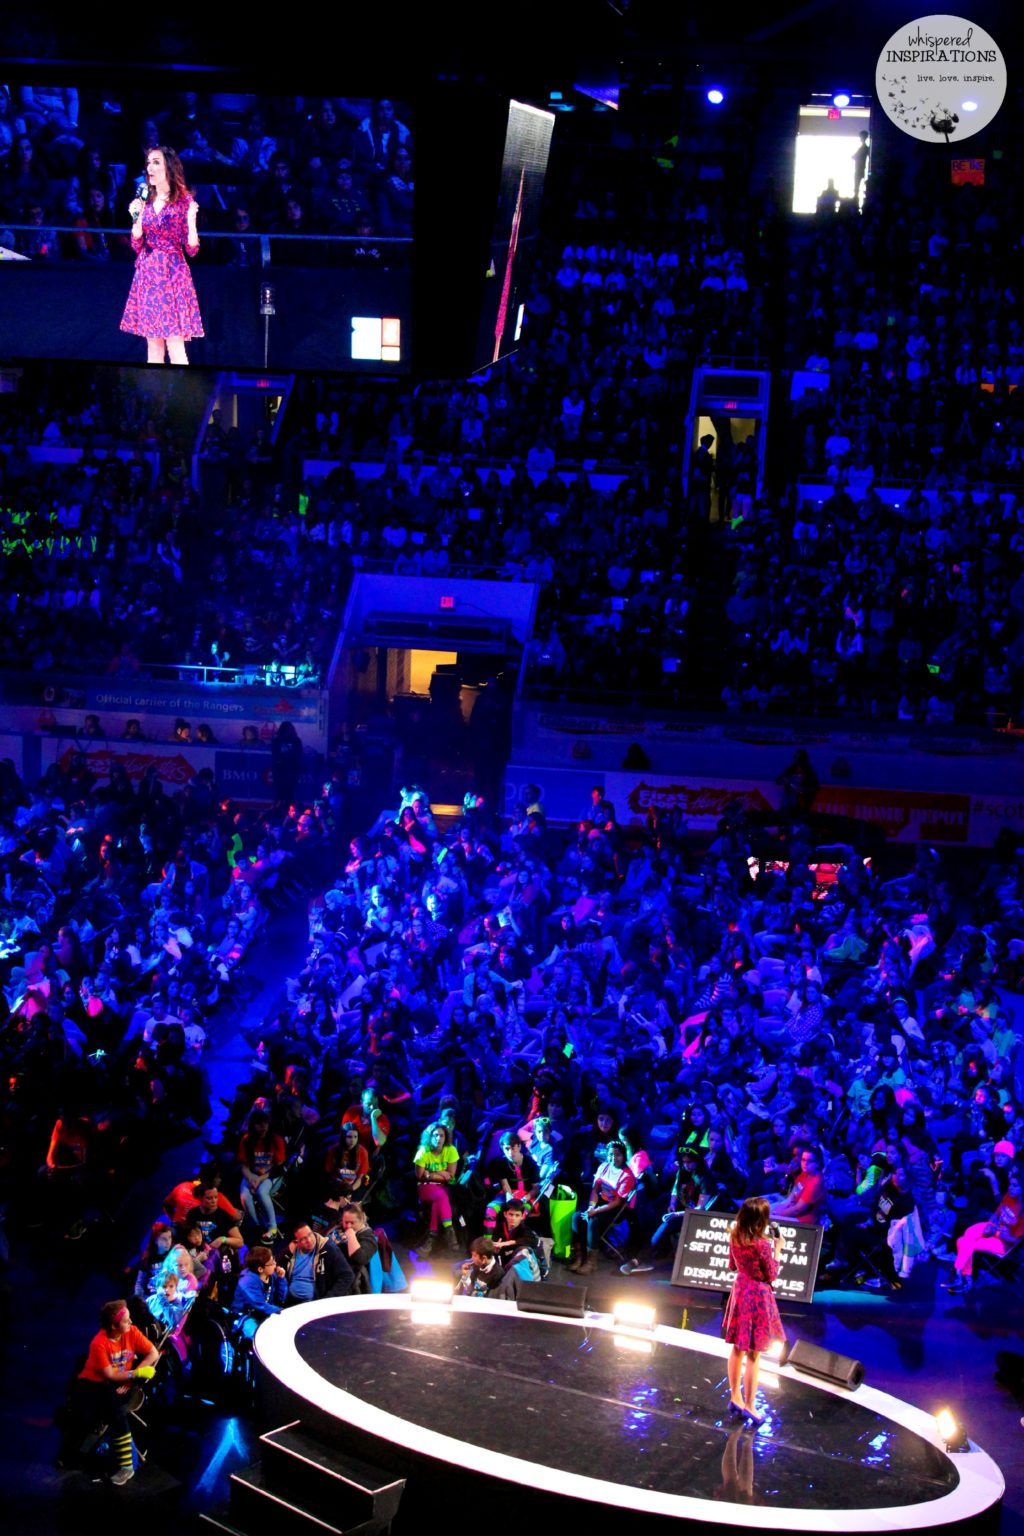 We Day Waterloo 2014: Every Young Person Has the Power to Change the World